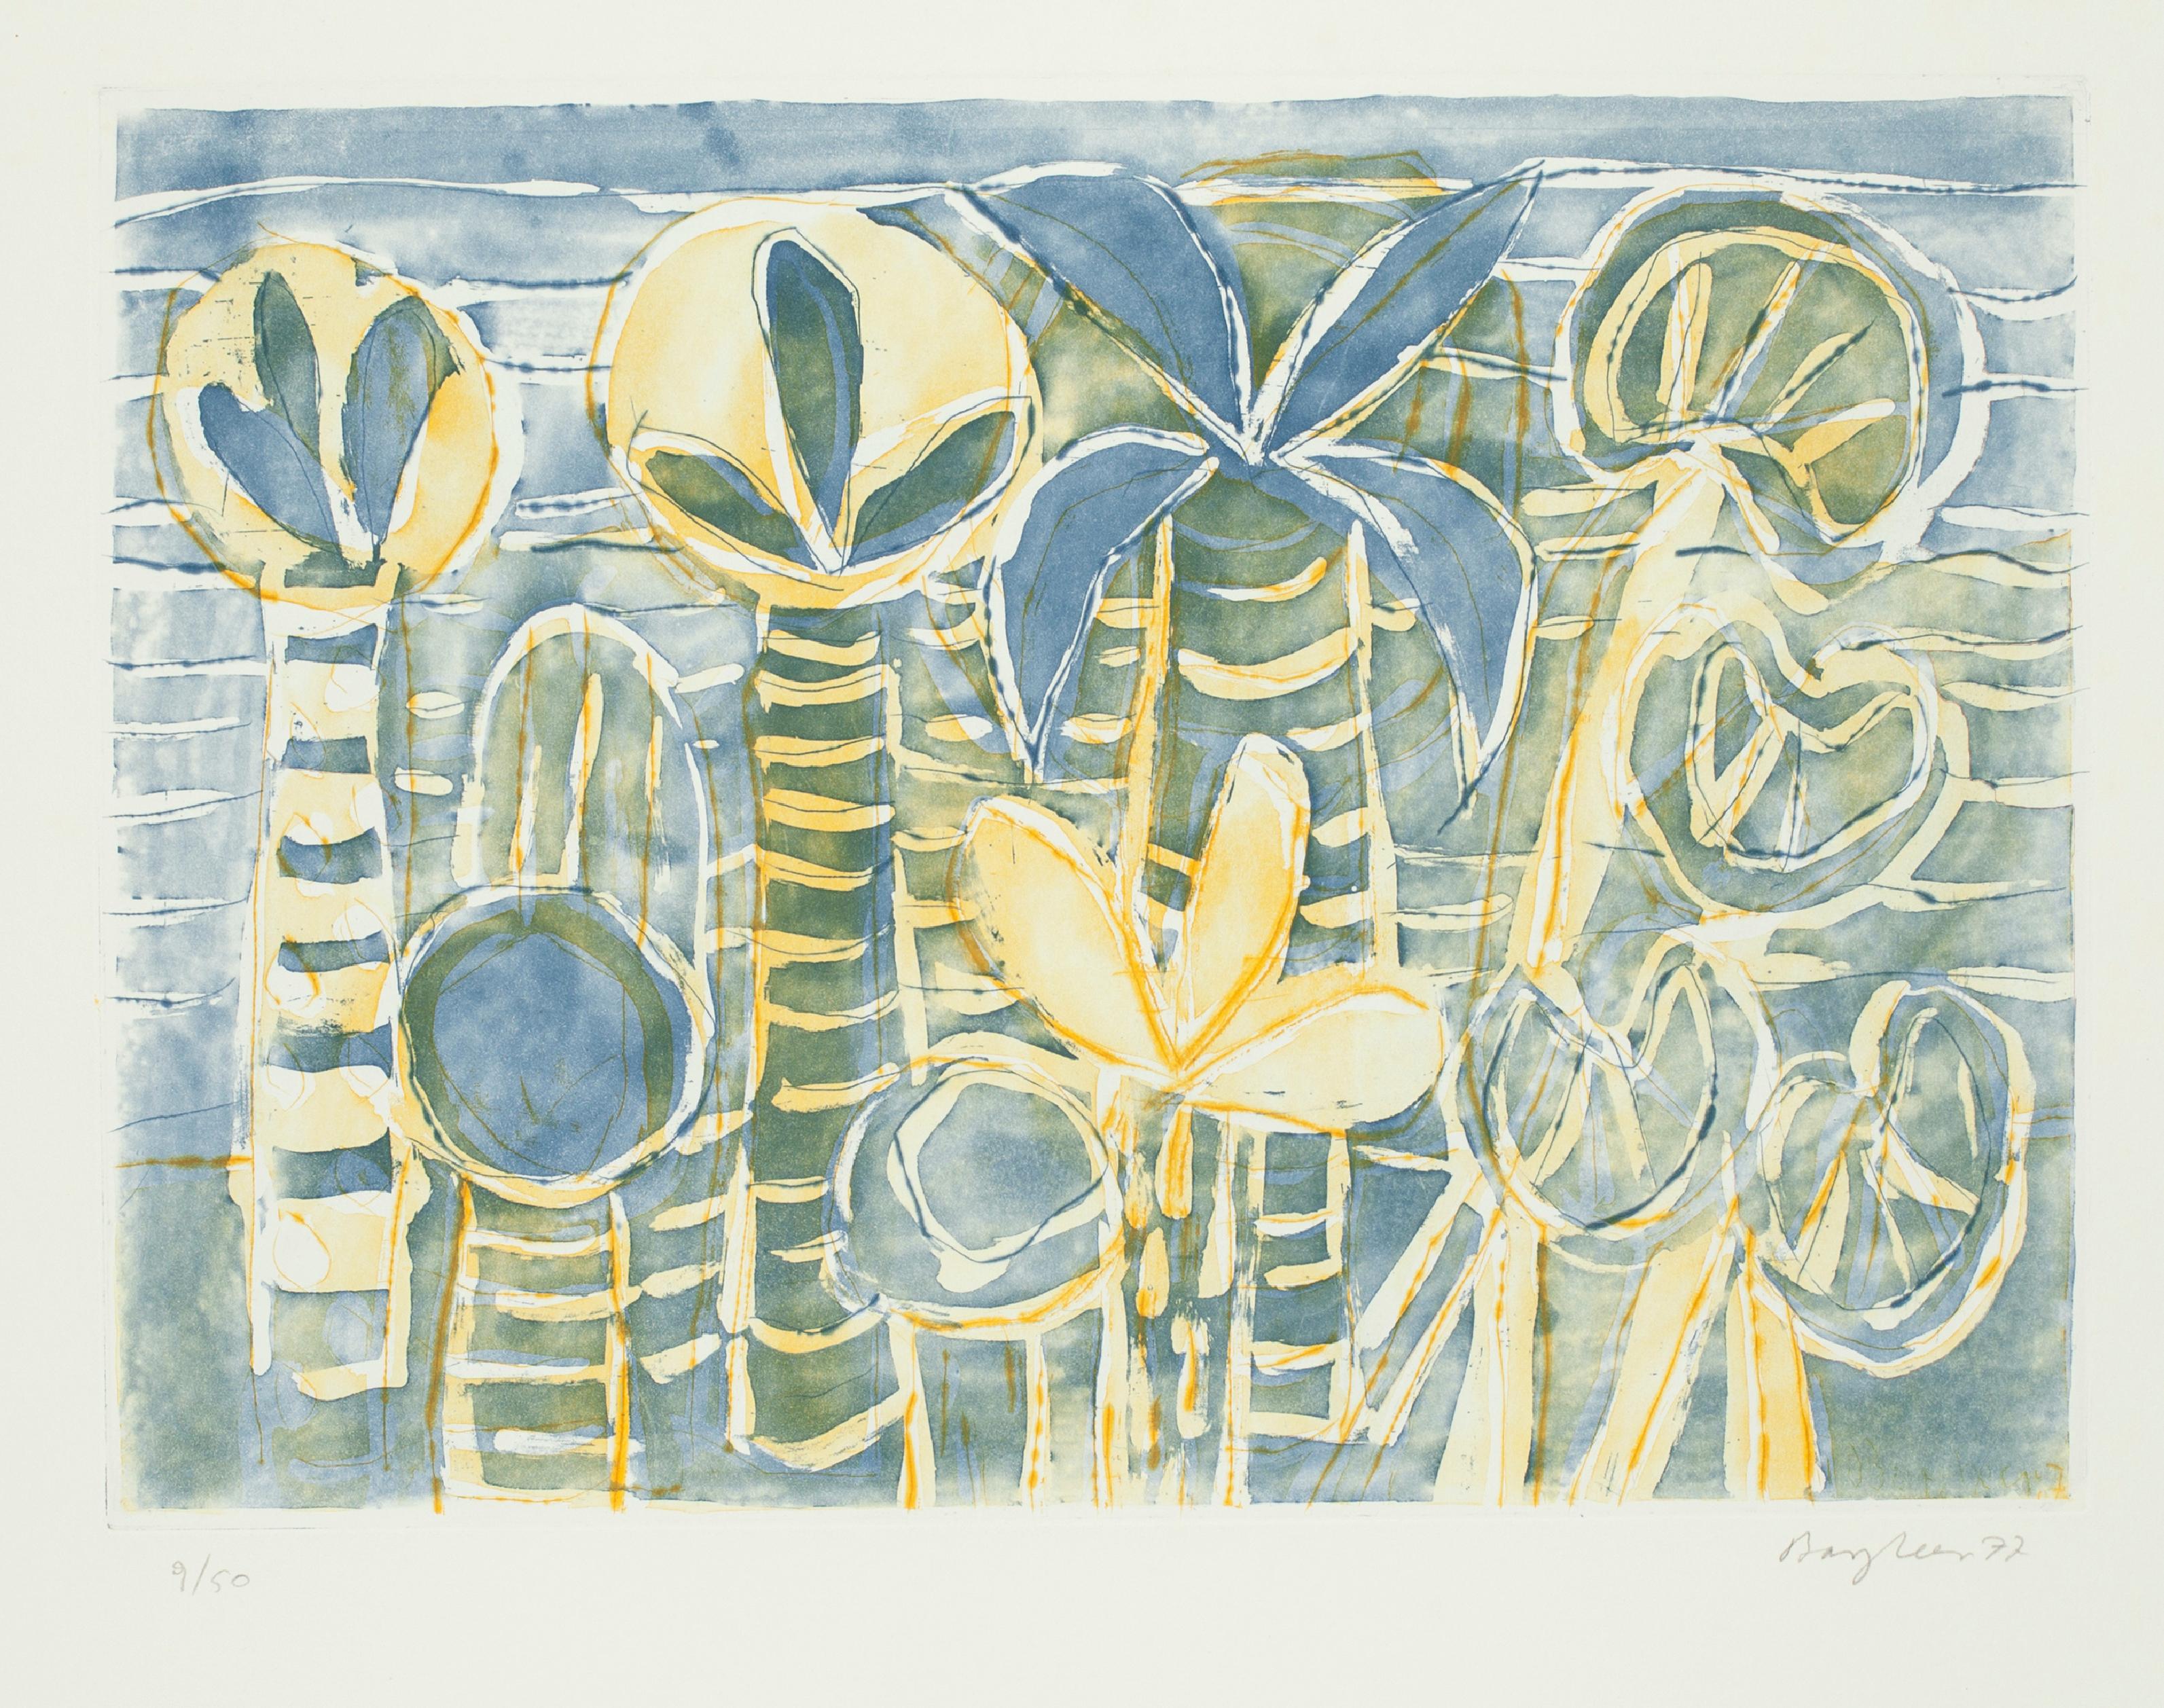 Plants is an original etching realized by Eduard Bargheer in 1977.

Hand-signed and numbered 9/50

Intense composition representing the flowers of Ischia.

Image dimensions: 31x41 cm.

Very good conditions.

Eduard Bargheer is known for his